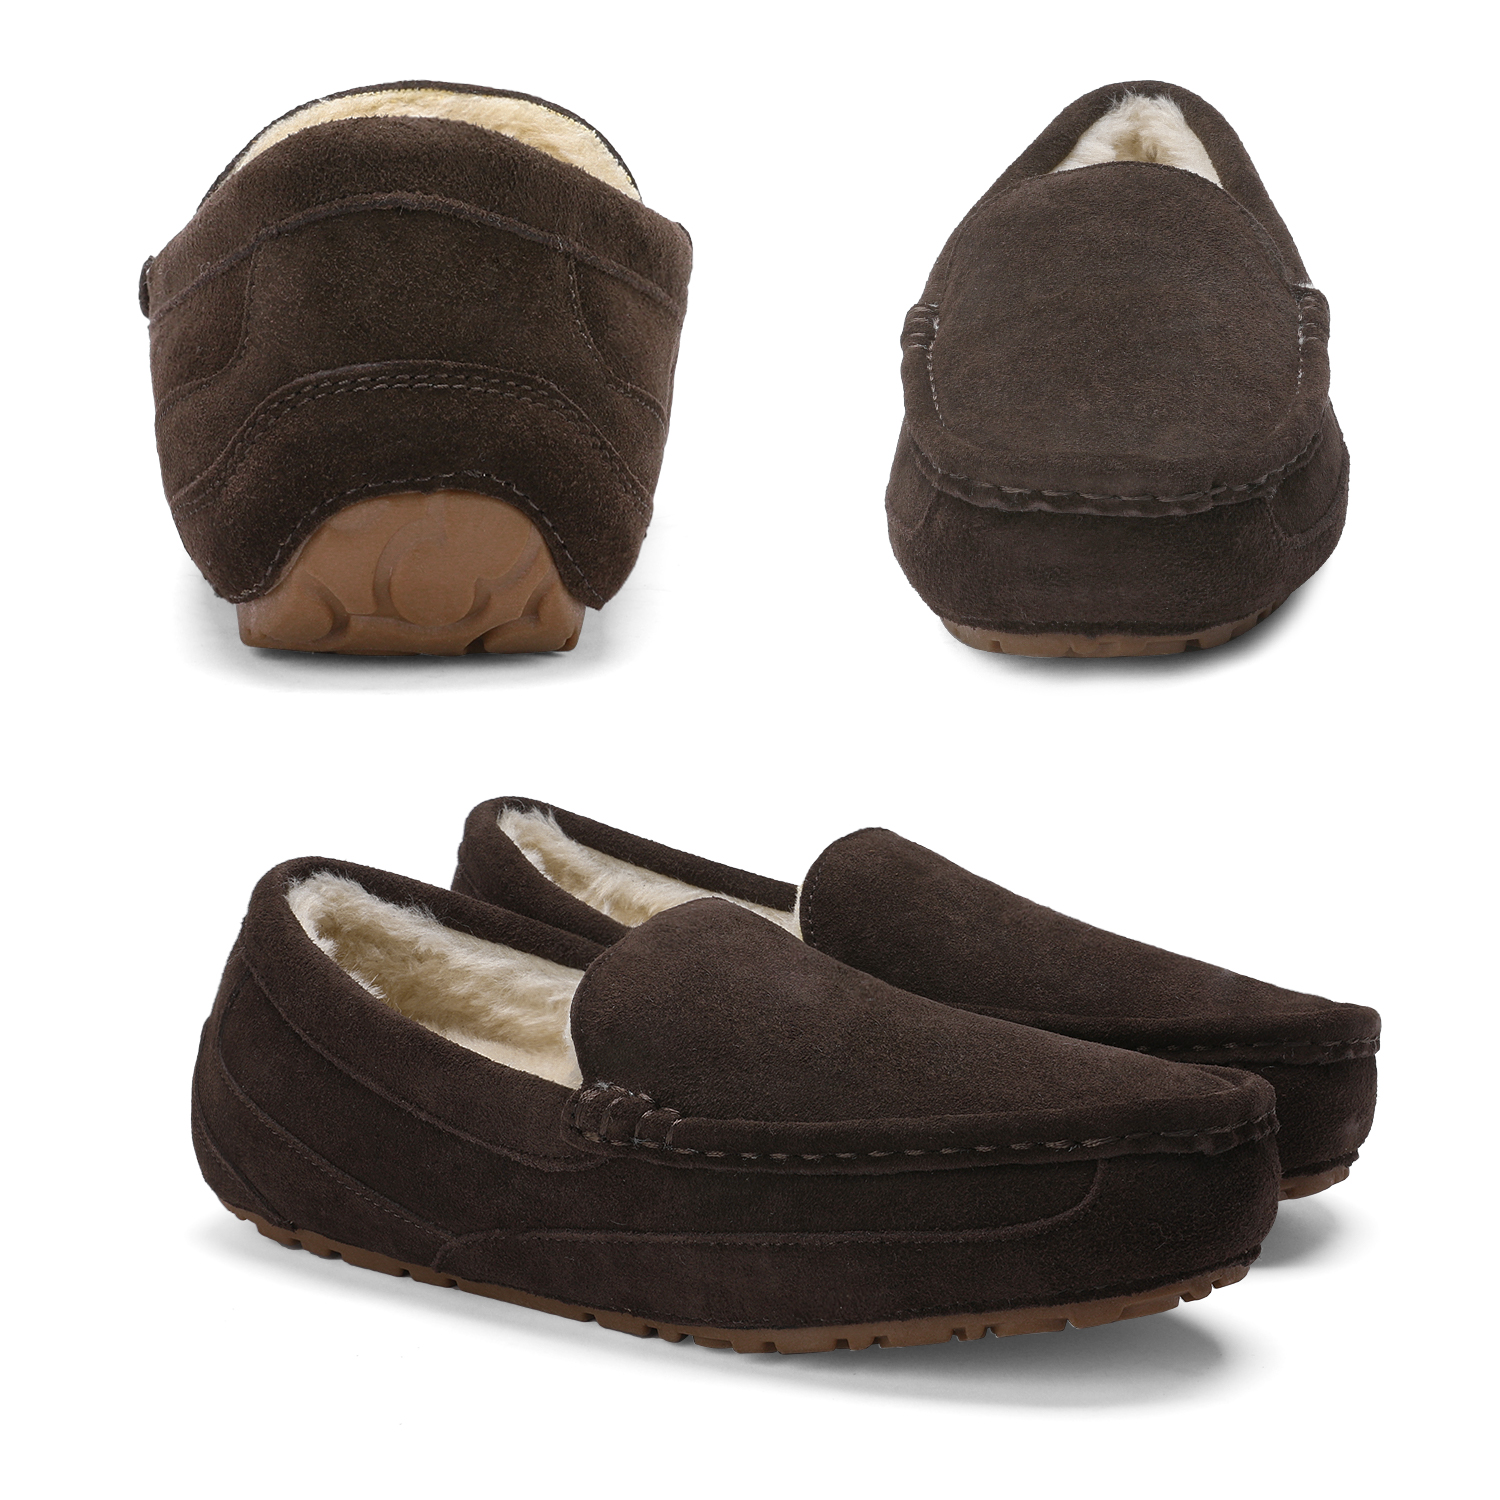 Dream Pairs New Soft Mens Au-Loafer Indoor Warm Moccasins Slippers Flats Shoes Au-Loafer-01 Brown Size 8 - image 4 of 4